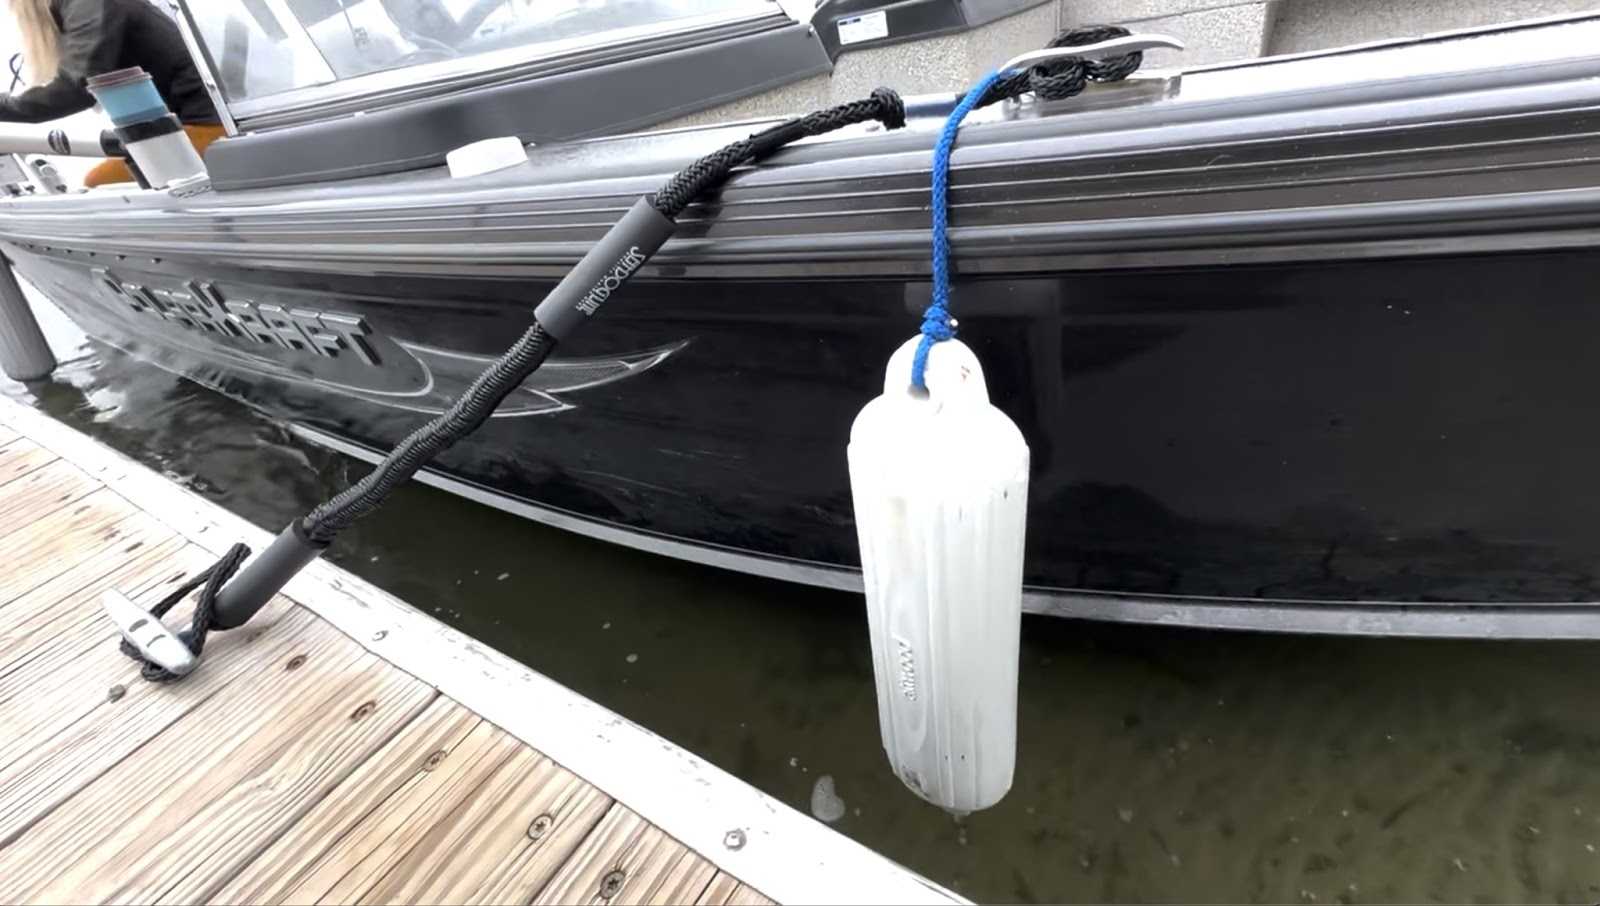 Tigress Boat Accessories Increase Your Fishing Capacity